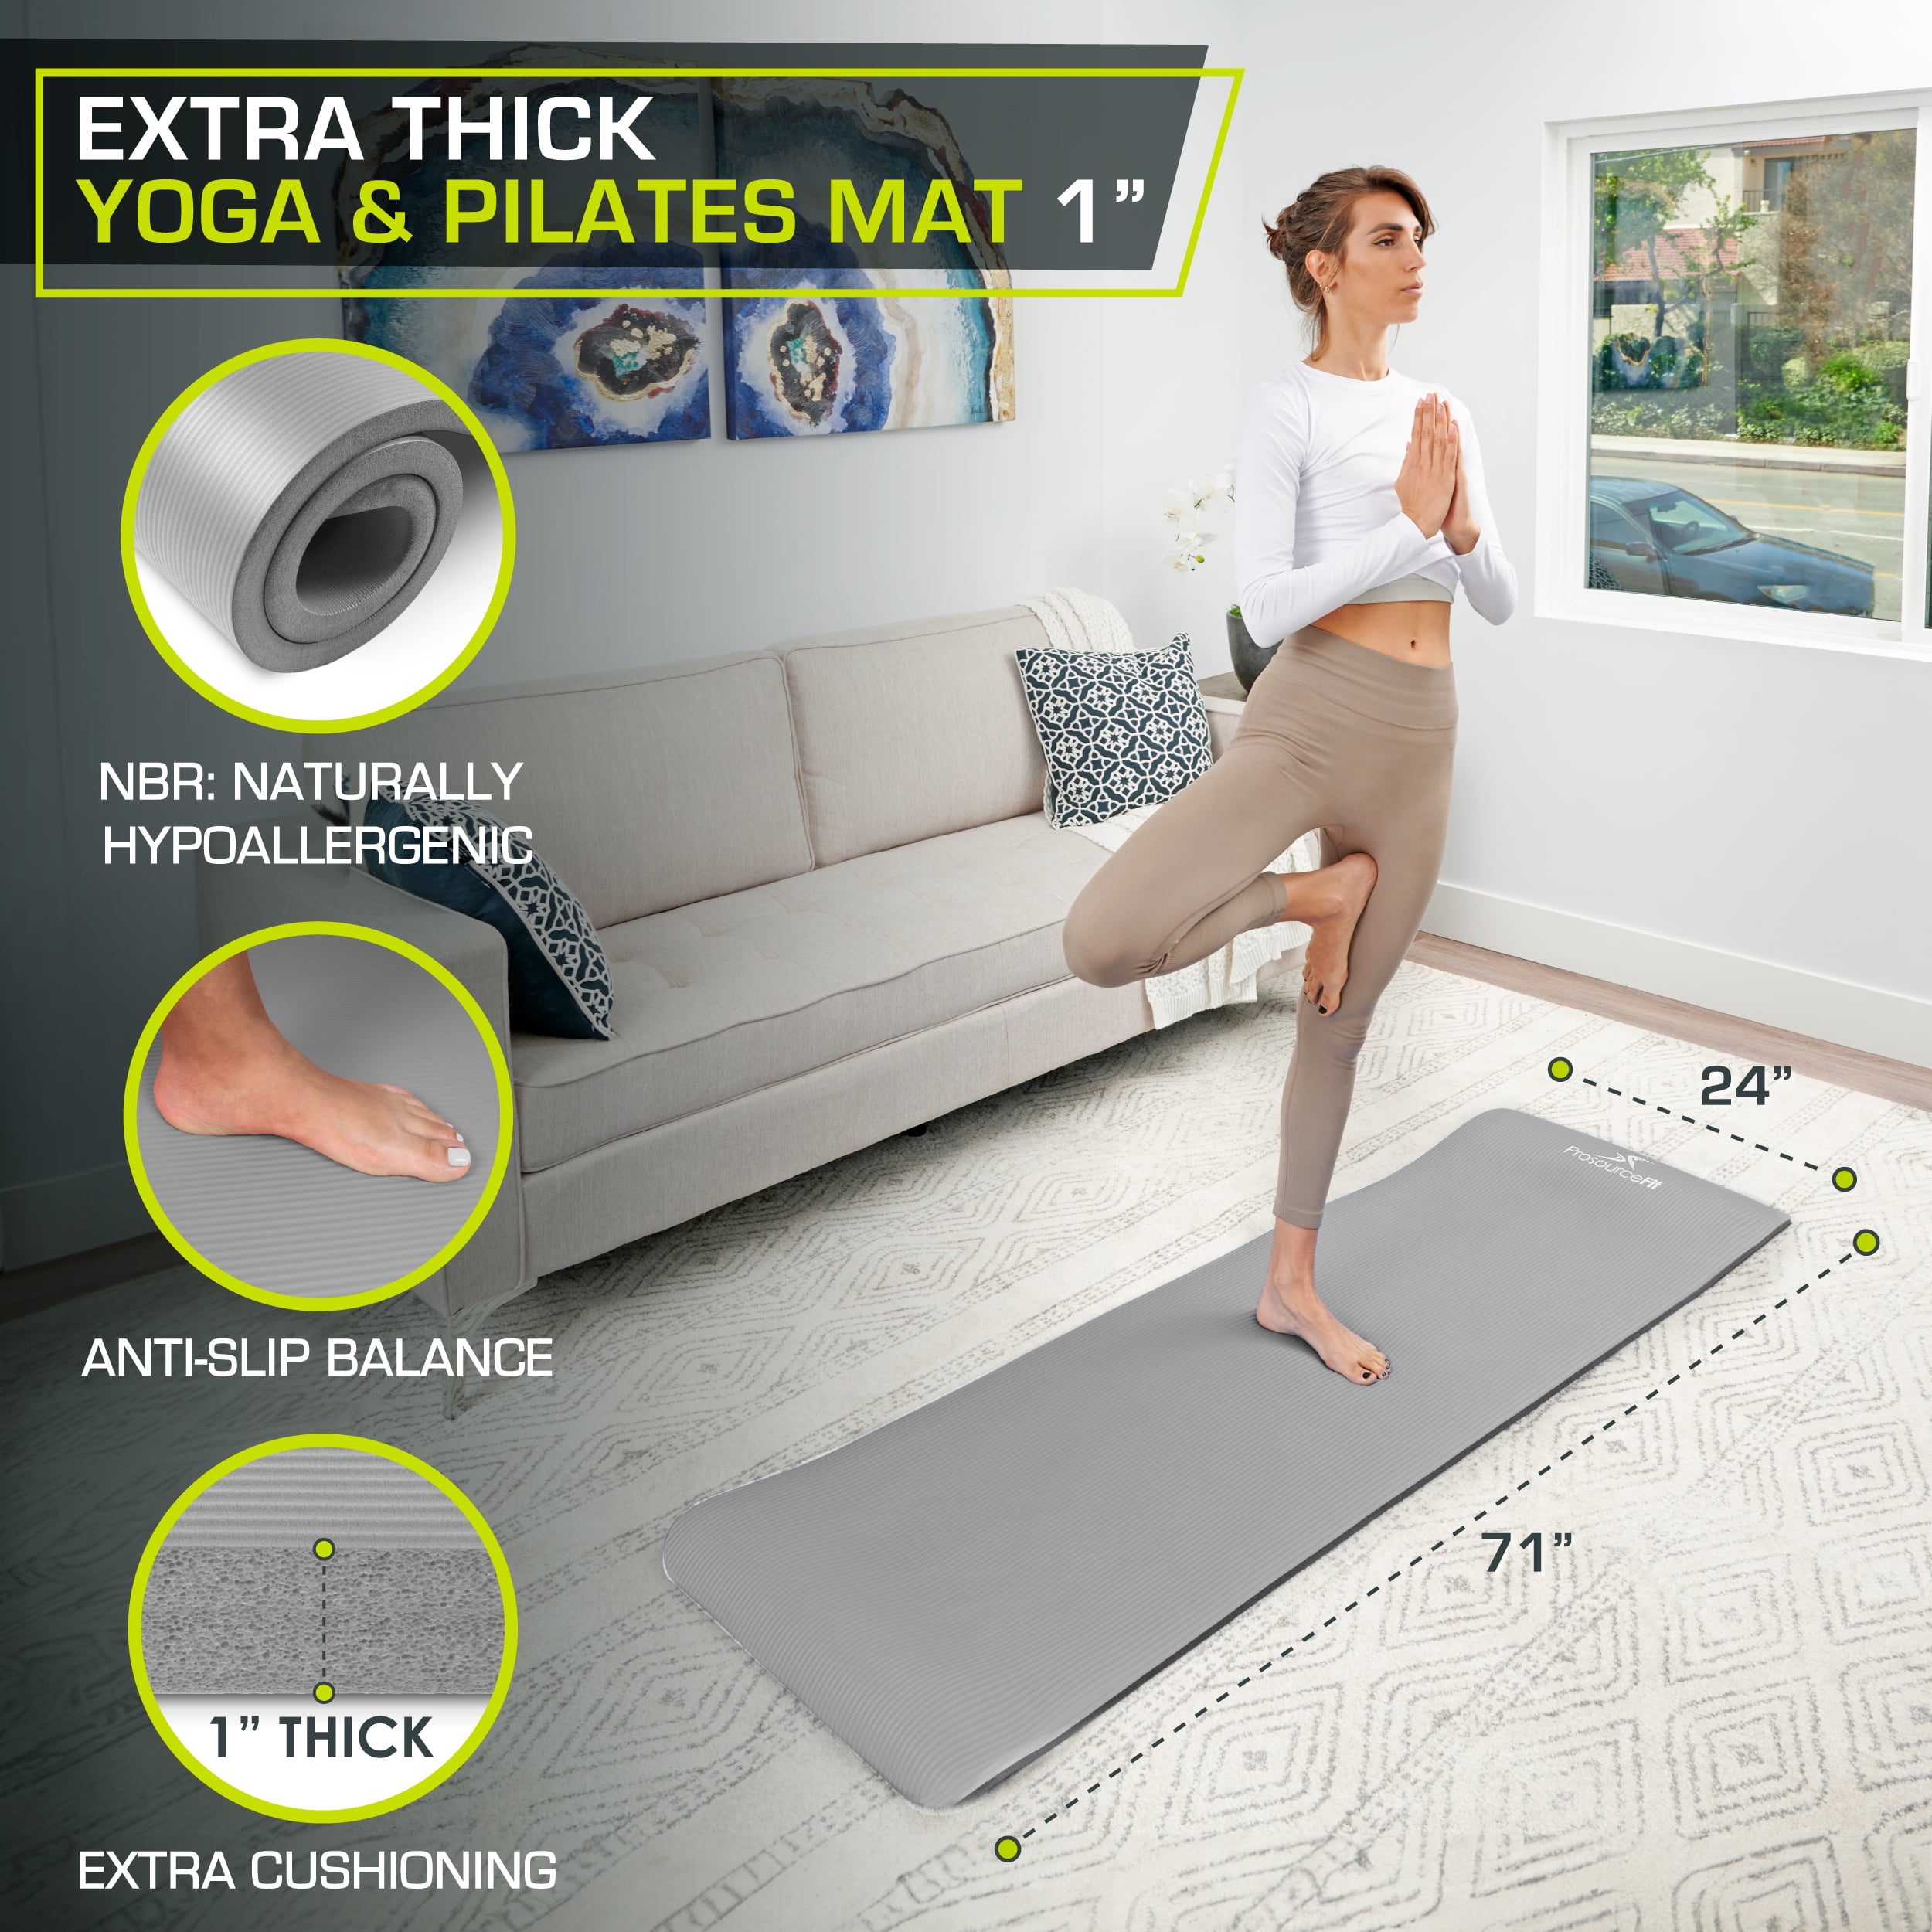 ProsourceFit Extra Thick Yoga and Pilates Mat 1-in, 71”L x 24”W